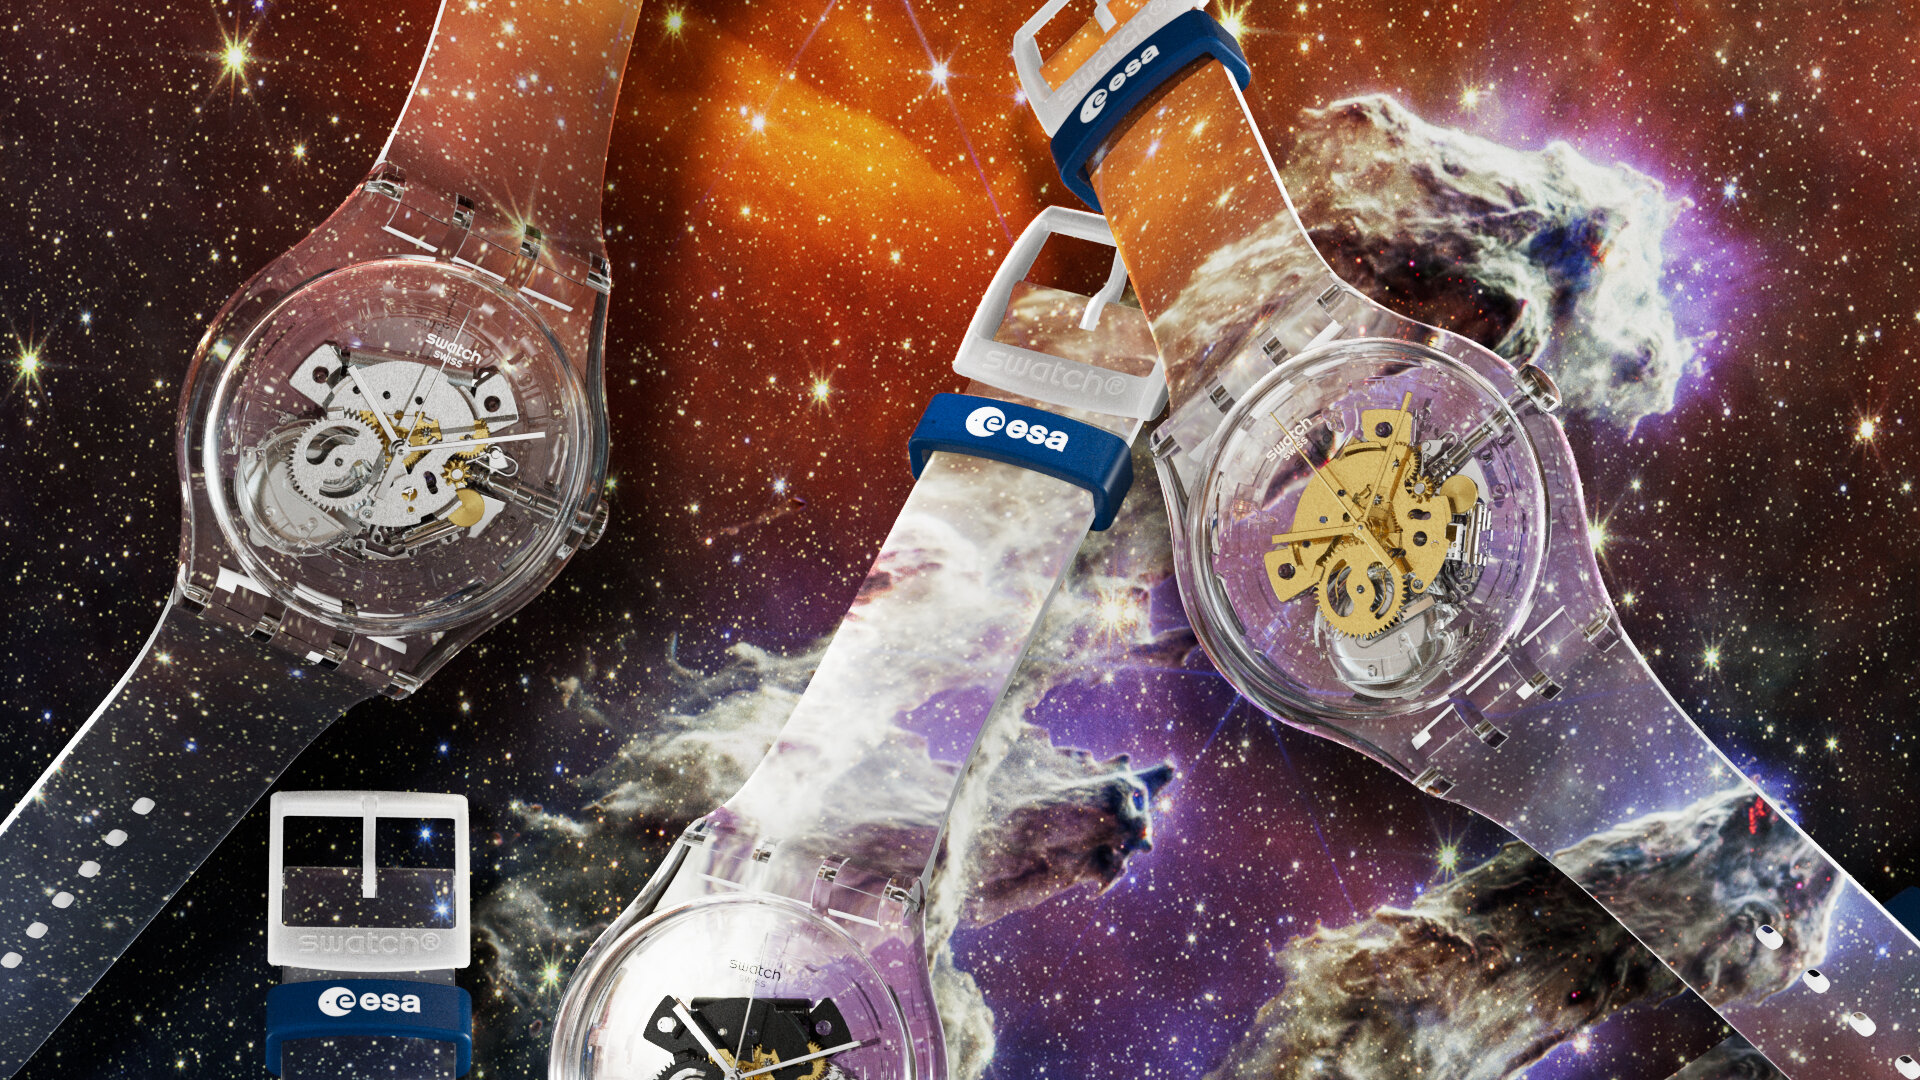 Watches from the ESA and Swatch X You collection